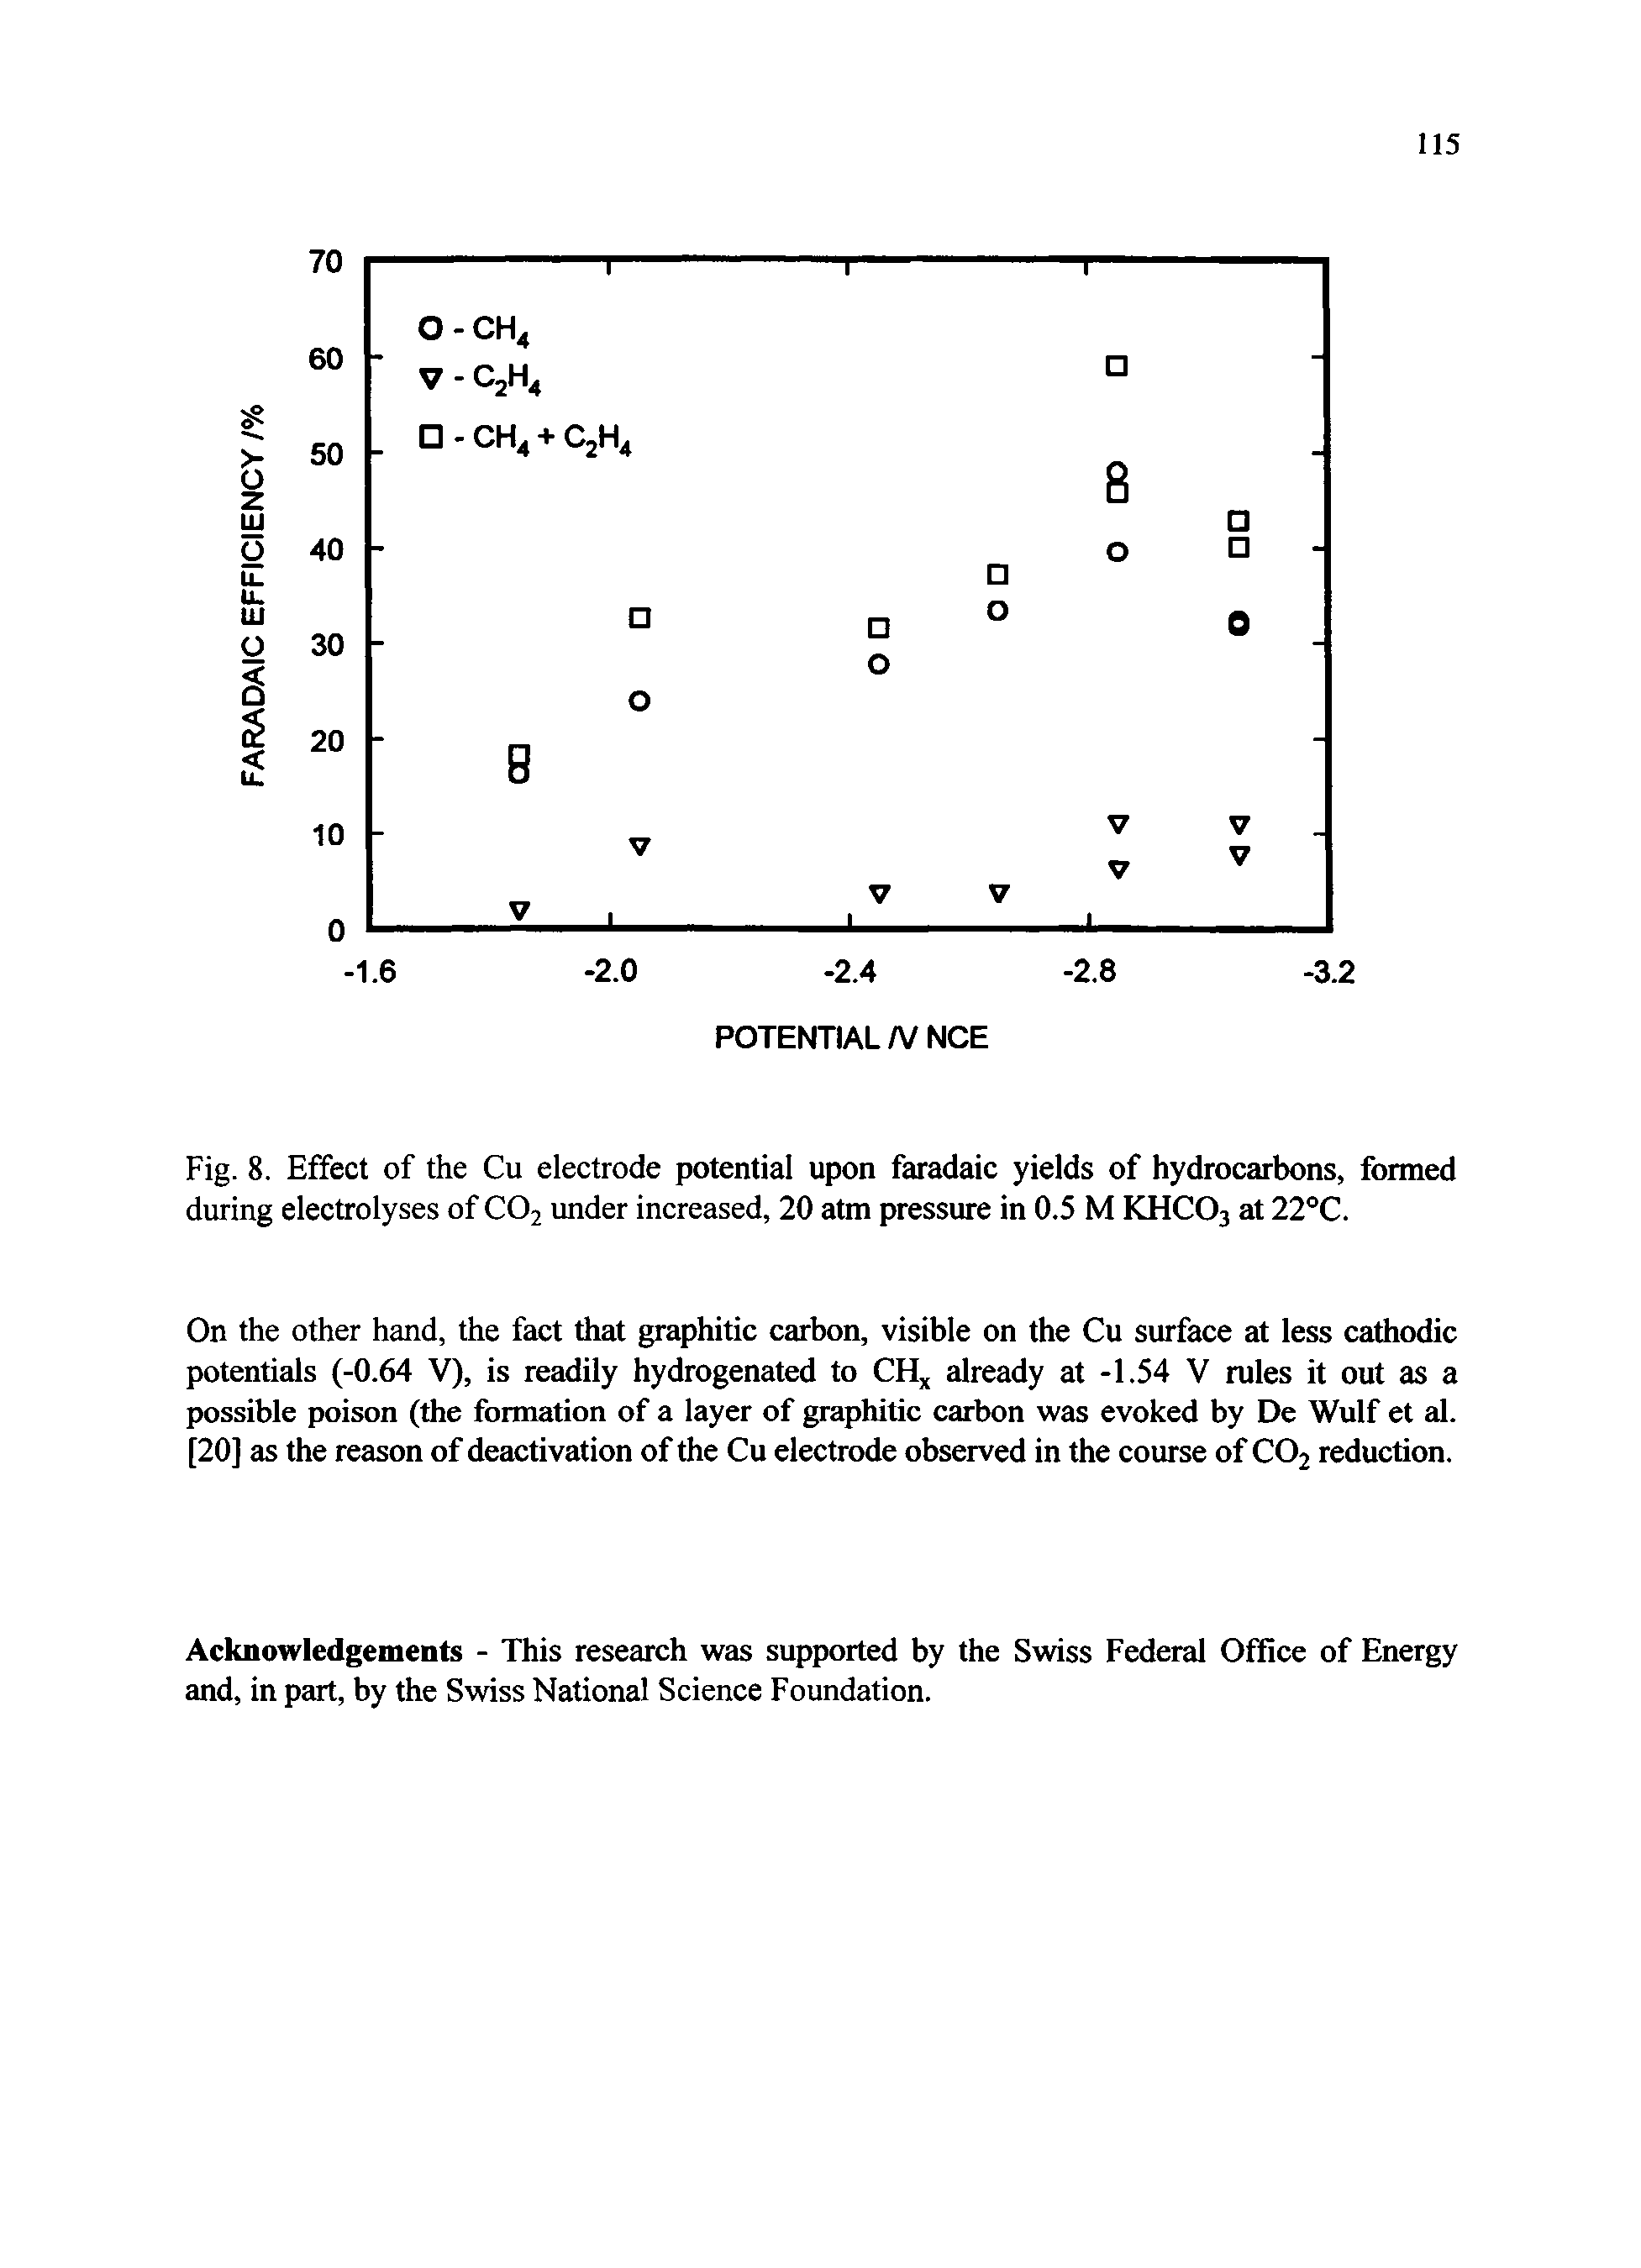 Fig. 8. Effect of the Cu electrode potential upon faradaic yields of hydrocarbons, formed during electrolyses of CO2 under increased, 20 atm pressure in 0.5 M KHCO3 at 22°C.